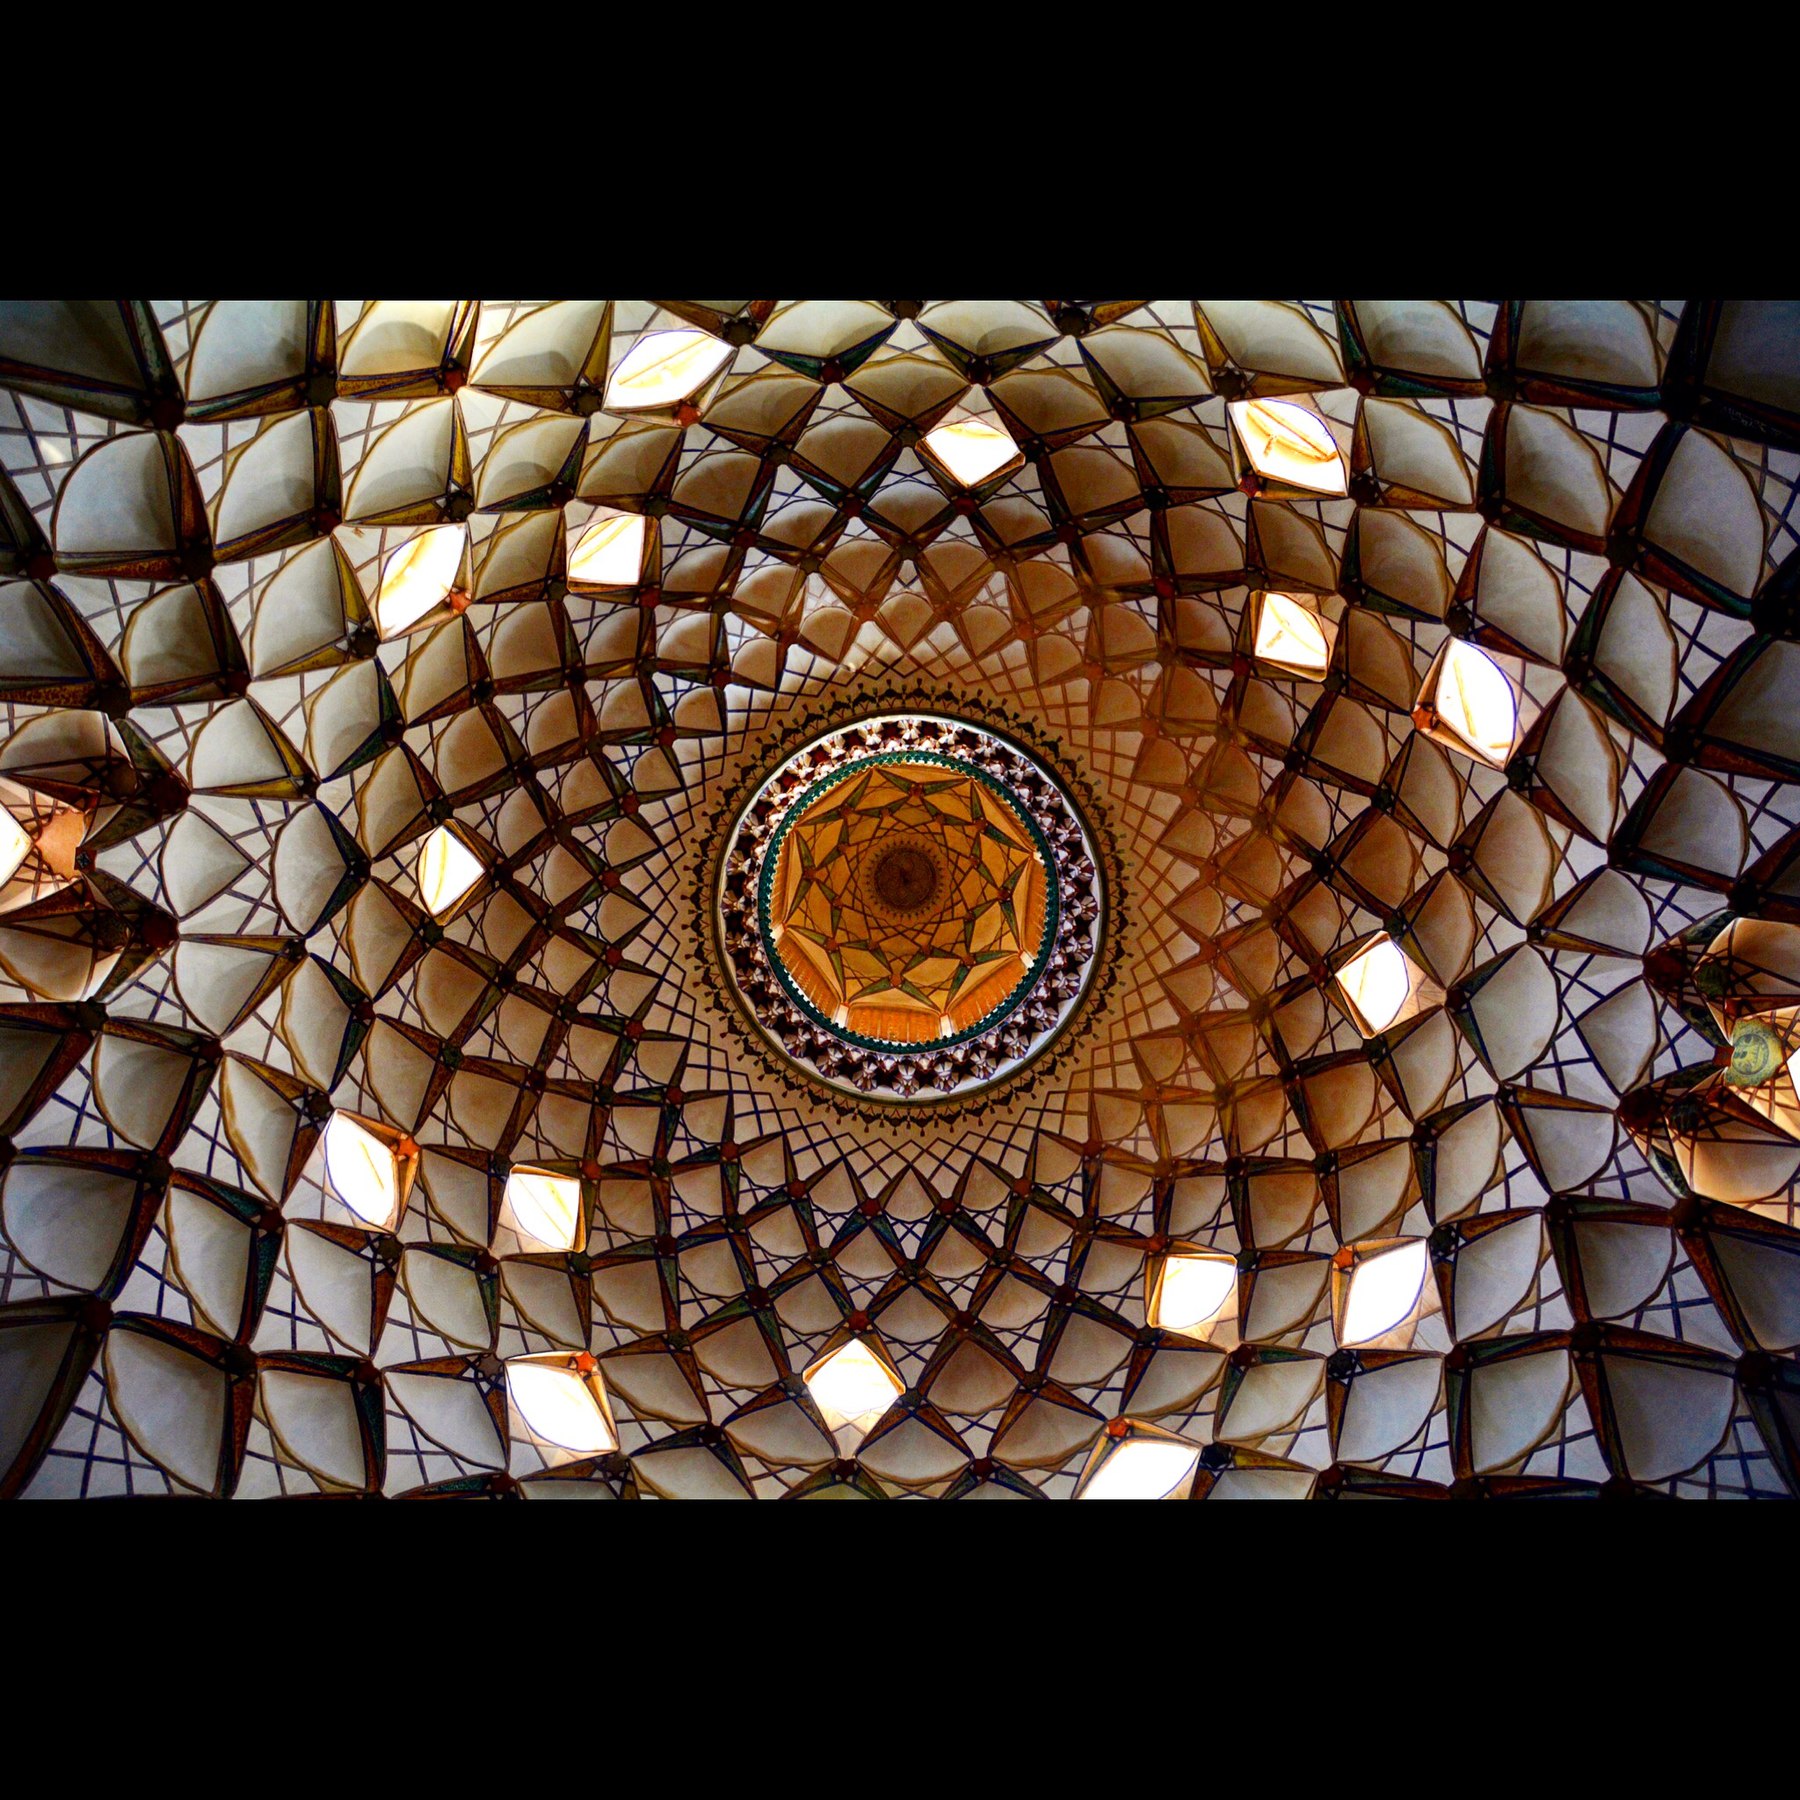 The ceiling of one of the rooms in Tabātabāei House in Kashan. Photograph: 13ehnam Licensing: CC-BY-SA-4.0